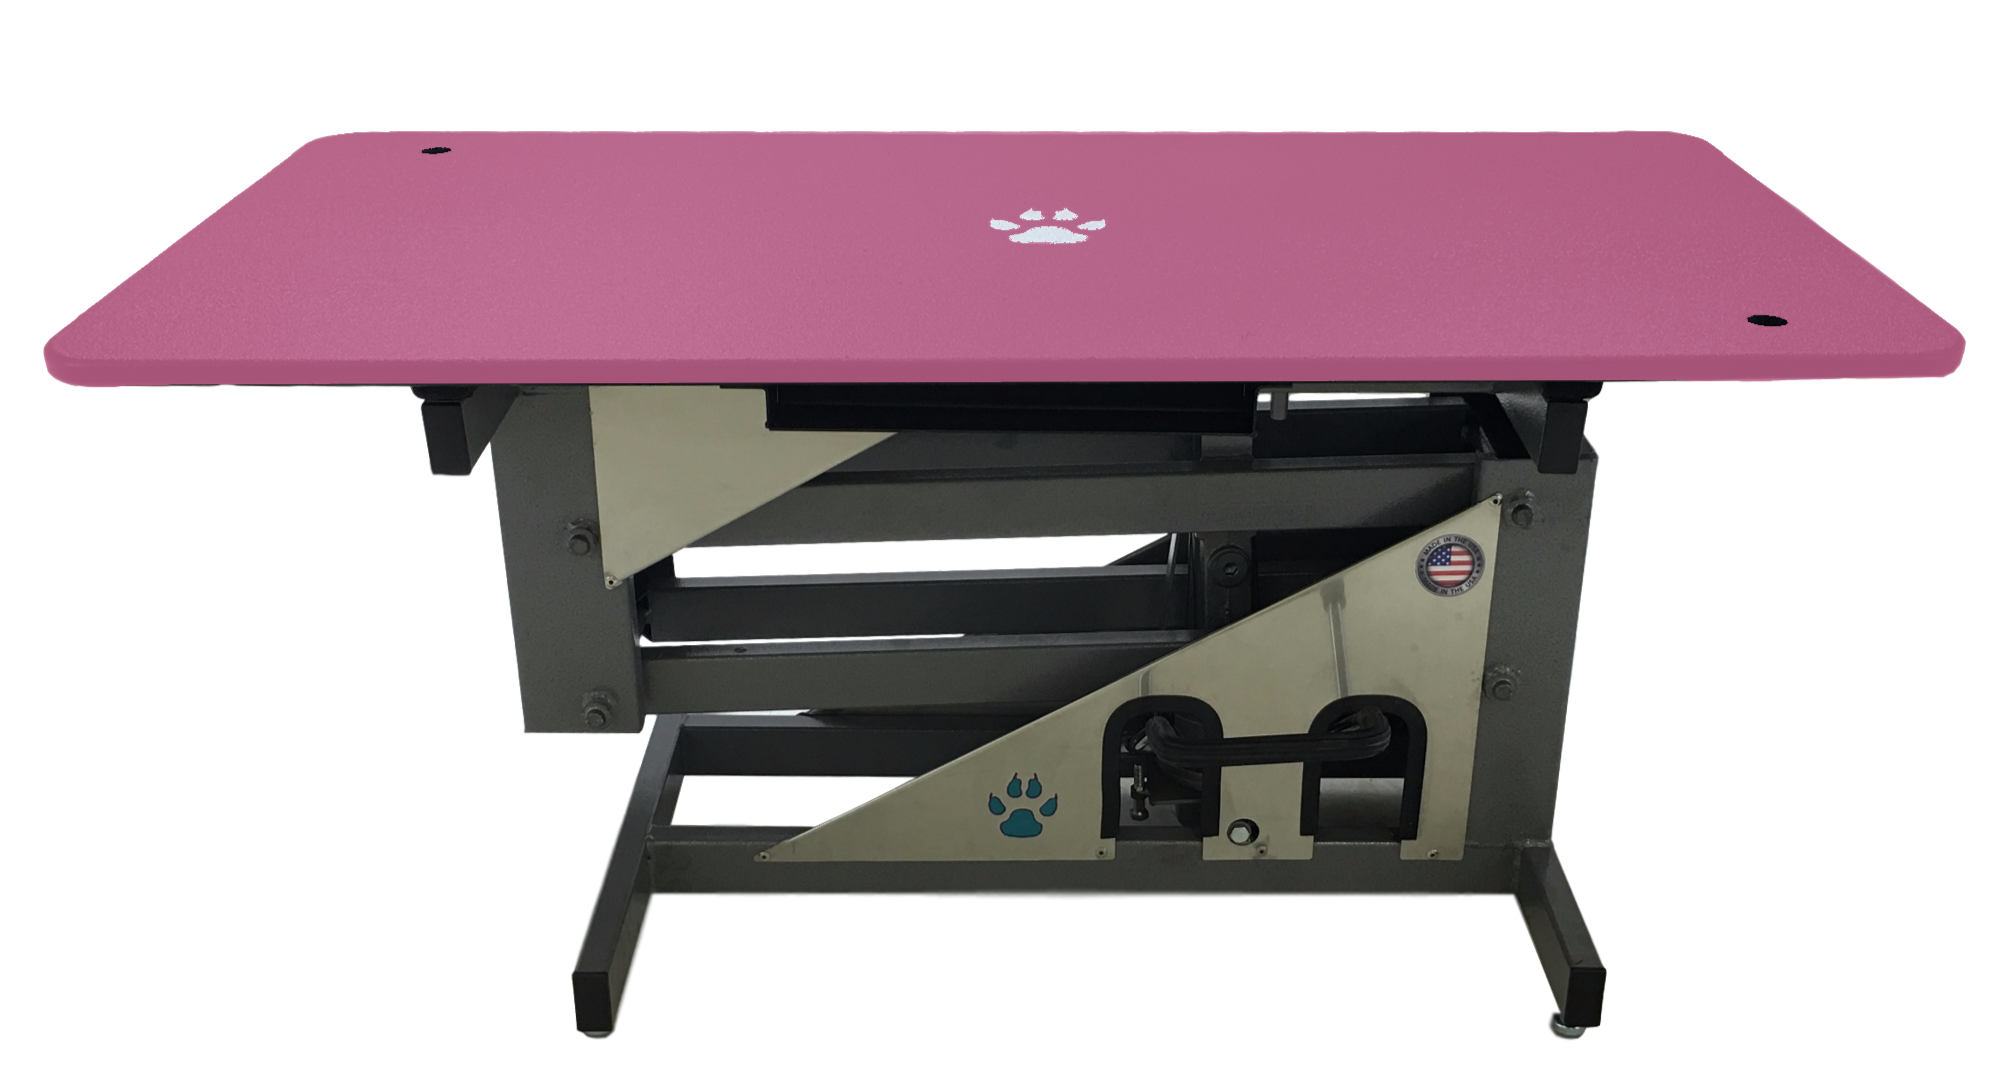 Groomer's Best Hydraulic Grooming Table with Foot Pump